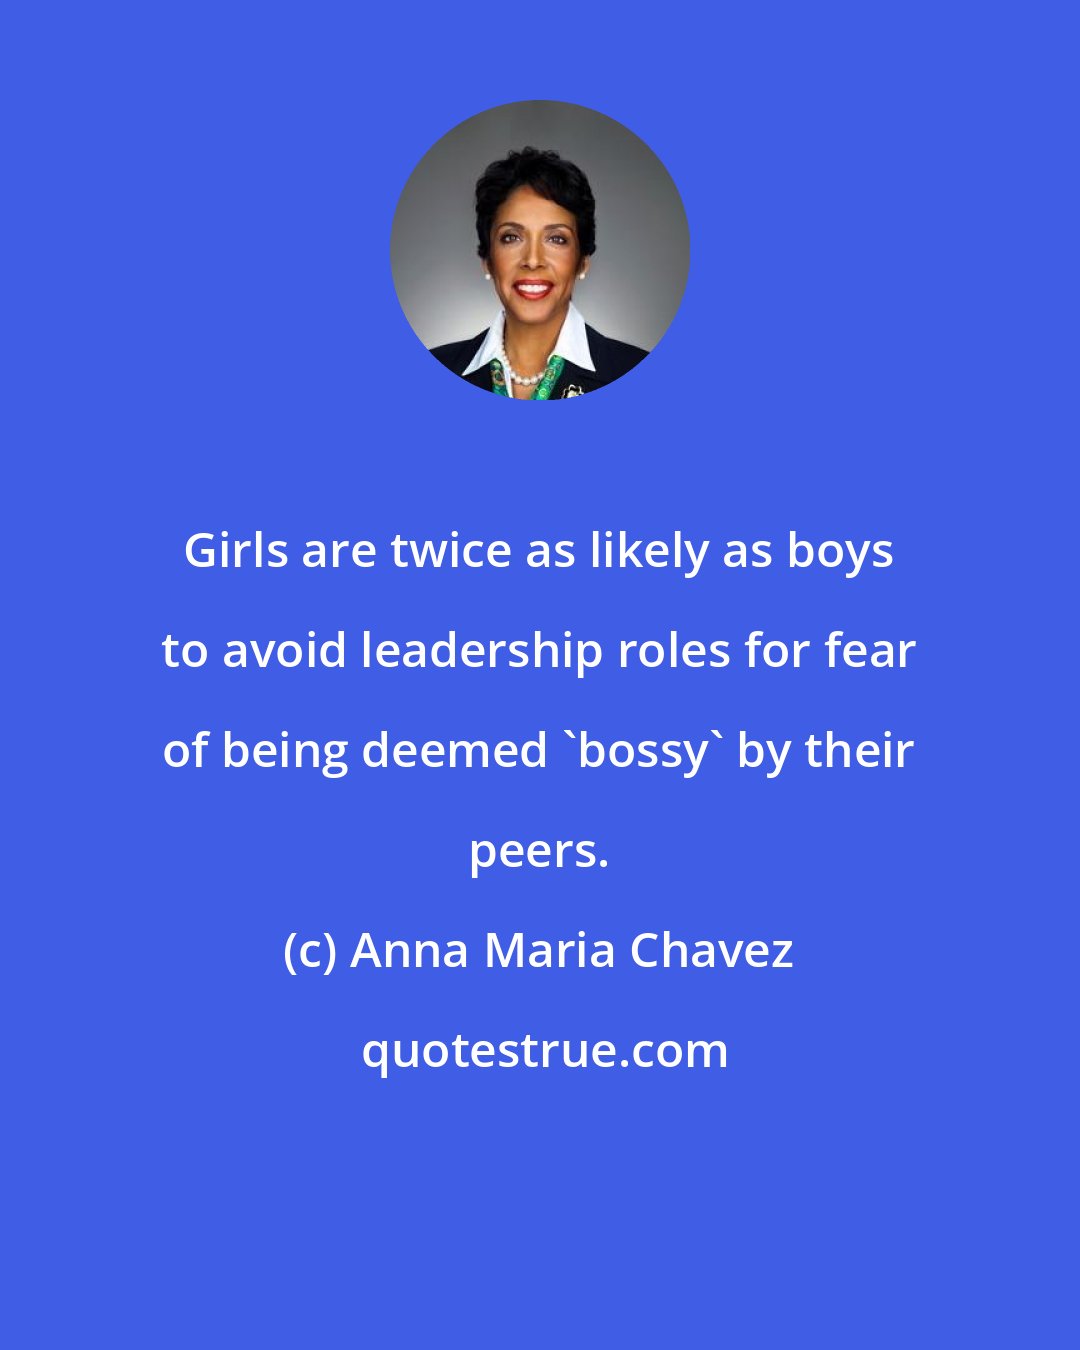 Anna Maria Chavez: Girls are twice as likely as boys to avoid leadership roles for fear of being deemed 'bossy' by their peers.